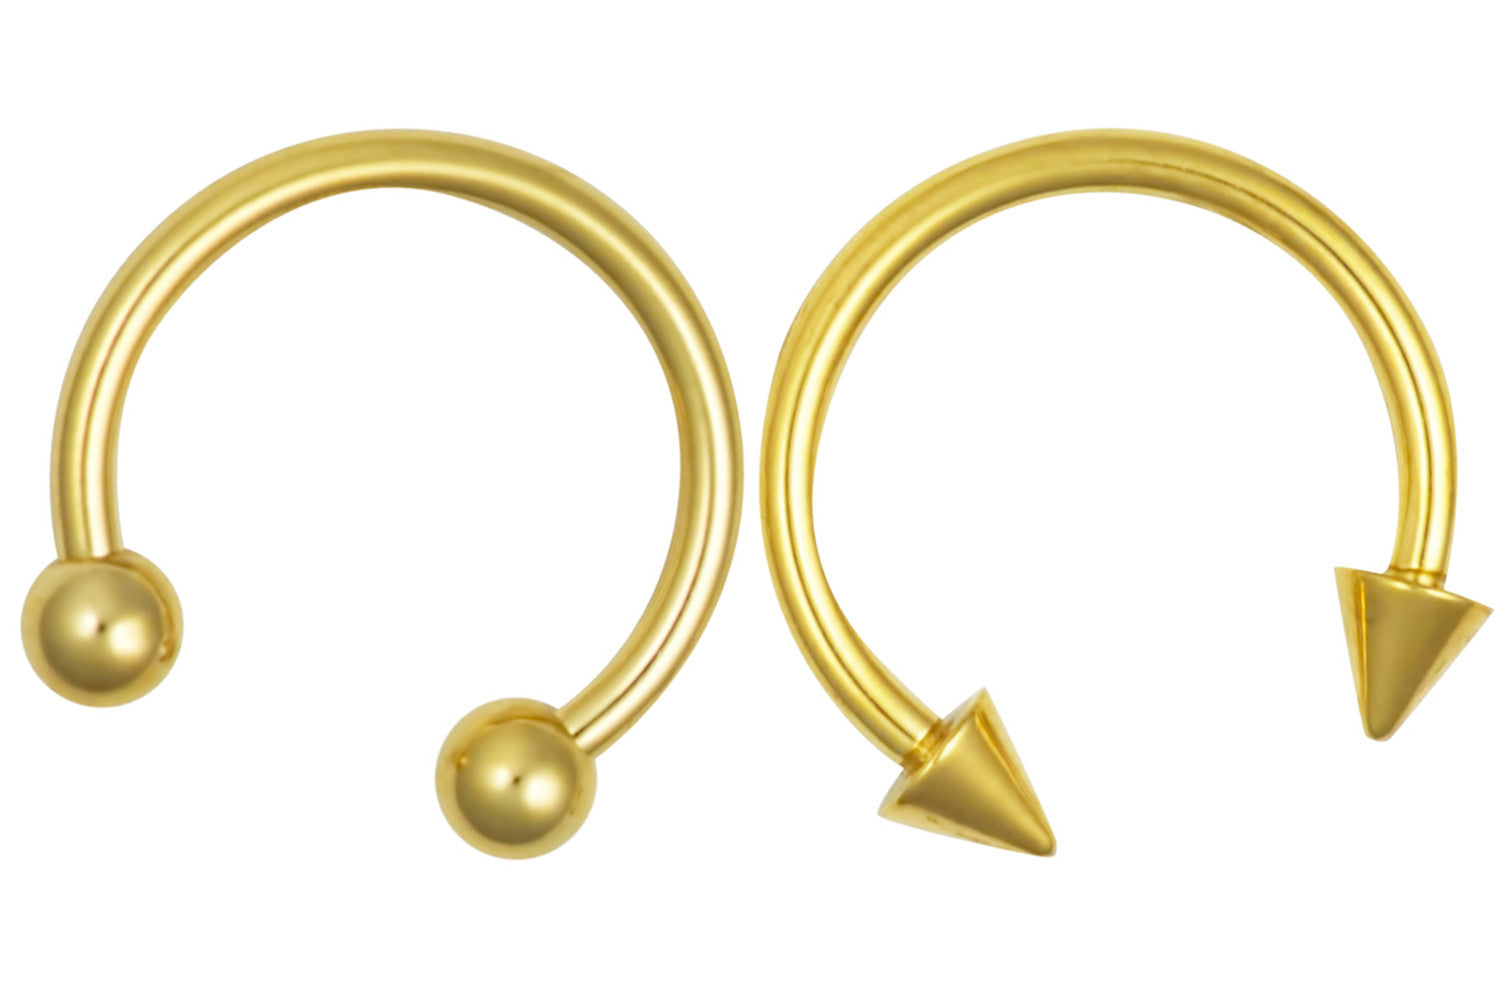 These 16 gauge septum horseshoe rings are made with surgical grade 316L Stainless Steel and Yellow Gold IP plating. IP (Ion Plating) is a safe and permanent fusion coating process used to enhance the durability, color and shine of body jewelry. These body jewelry rings are hypoallergenic and nickel free.